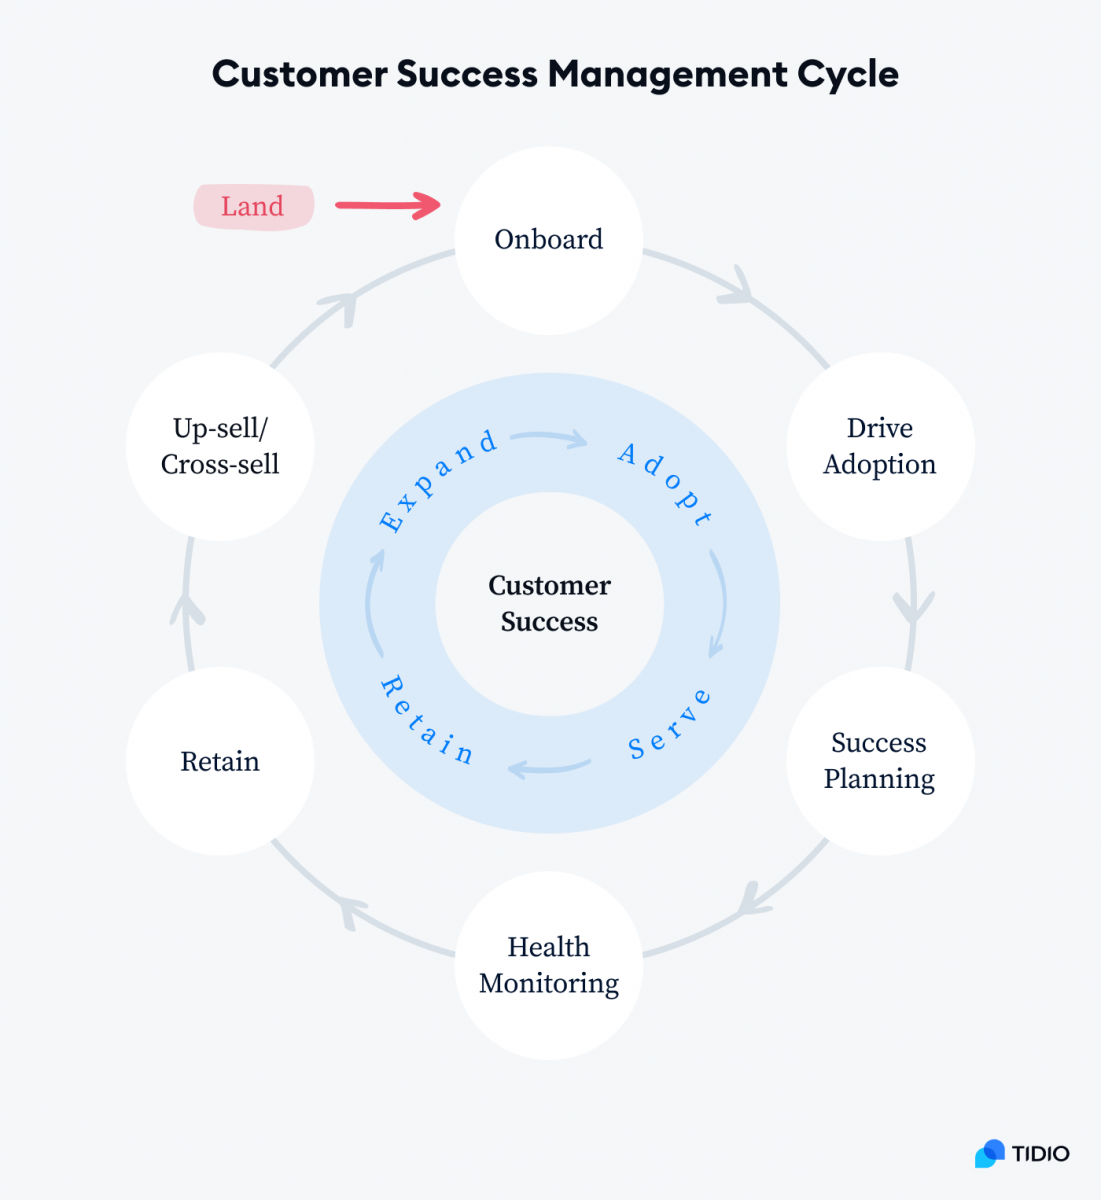 What Is a Customer Success Manager? [All You Need to Know]